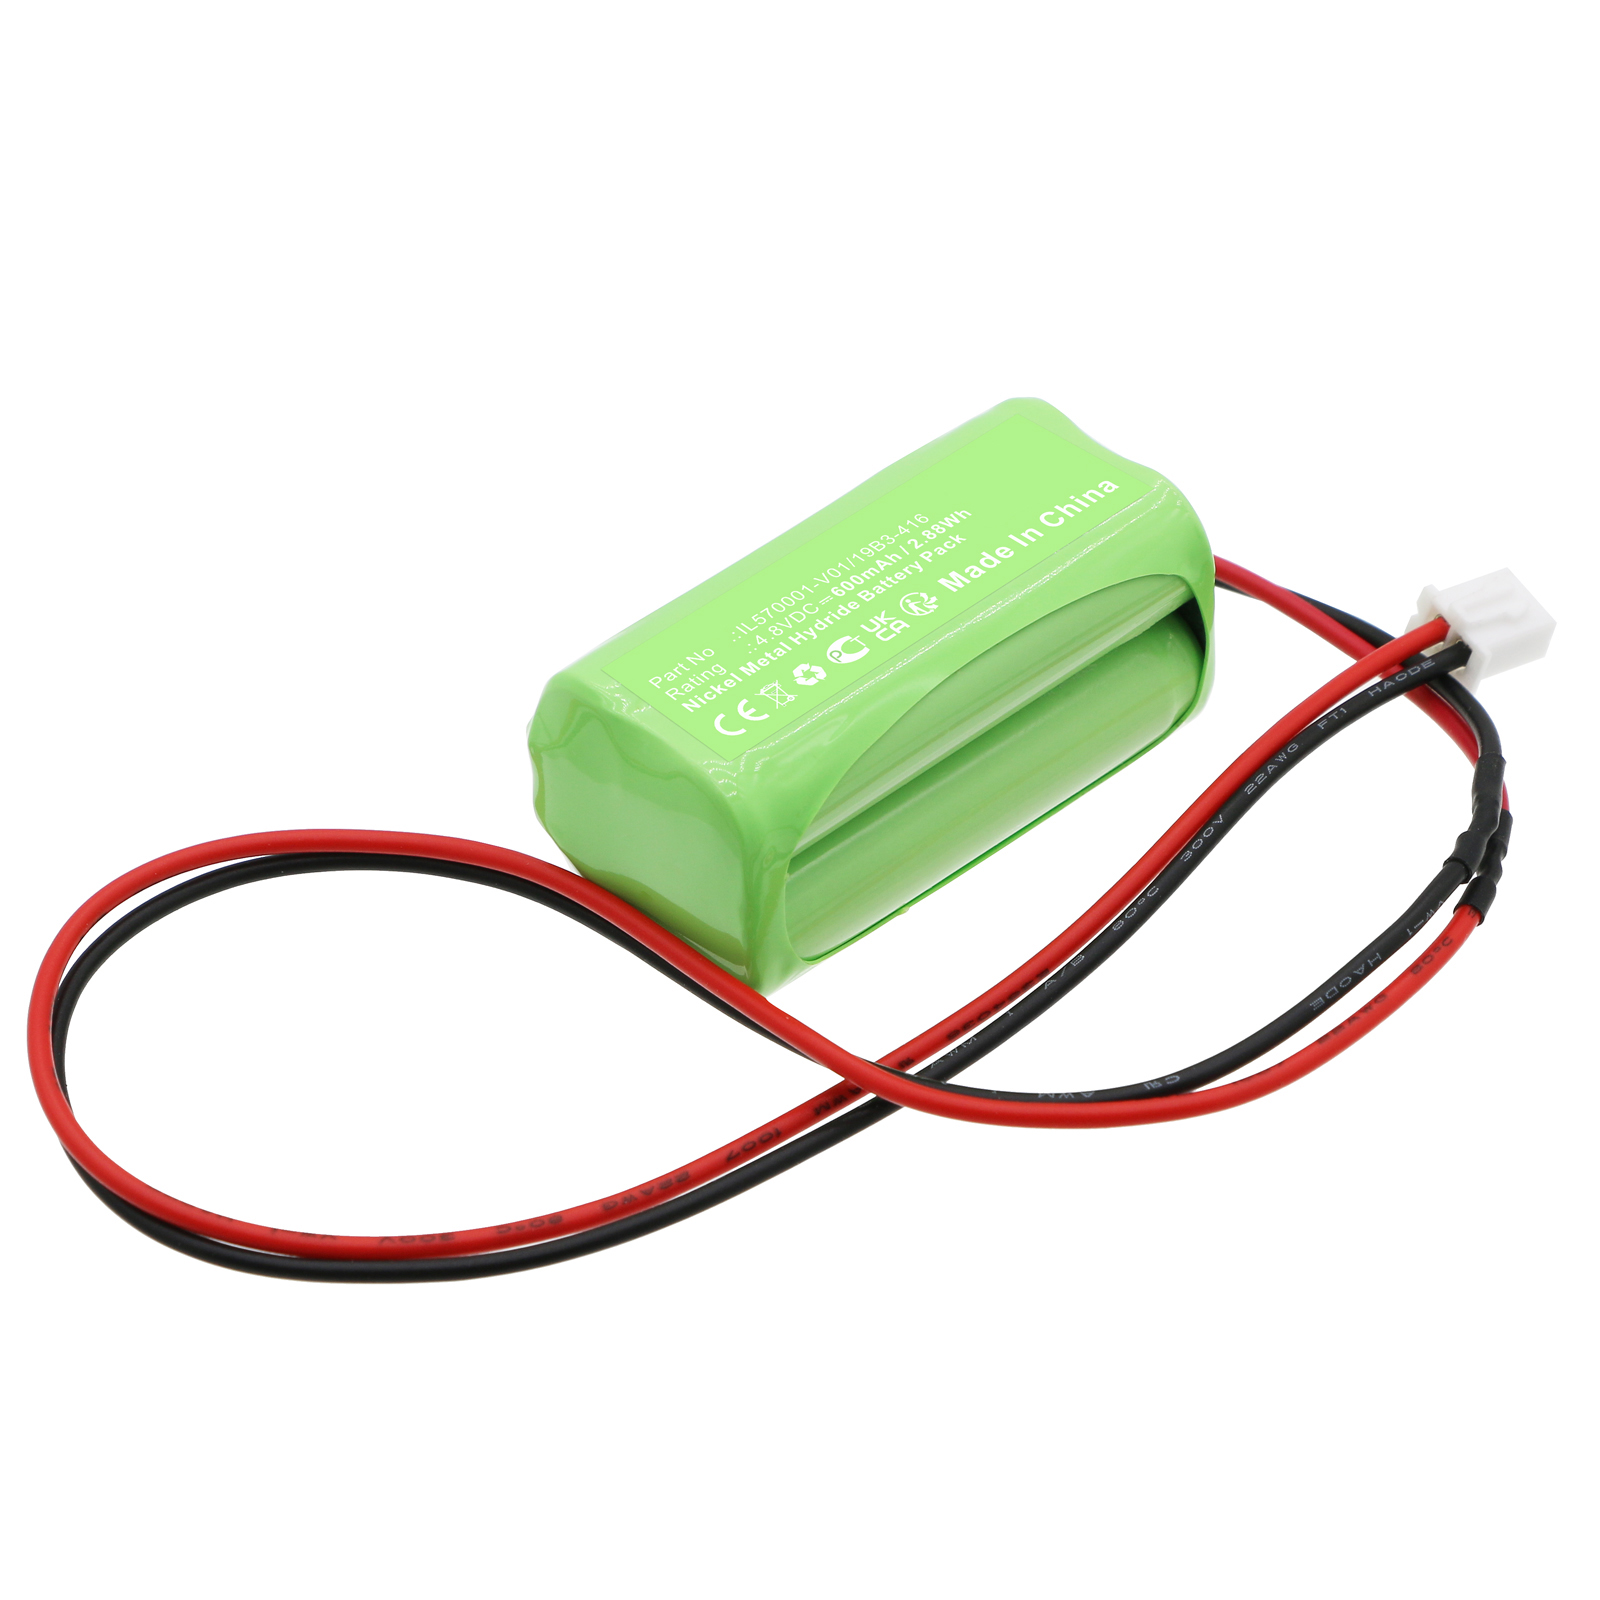 Synergy Digital Emergency Lighting Battery, Compatible with Thorn Voyager IL570001-V01/19B3-416 Emergency Lighting Battery (Ni-MH, 4.8V, 600mAh)